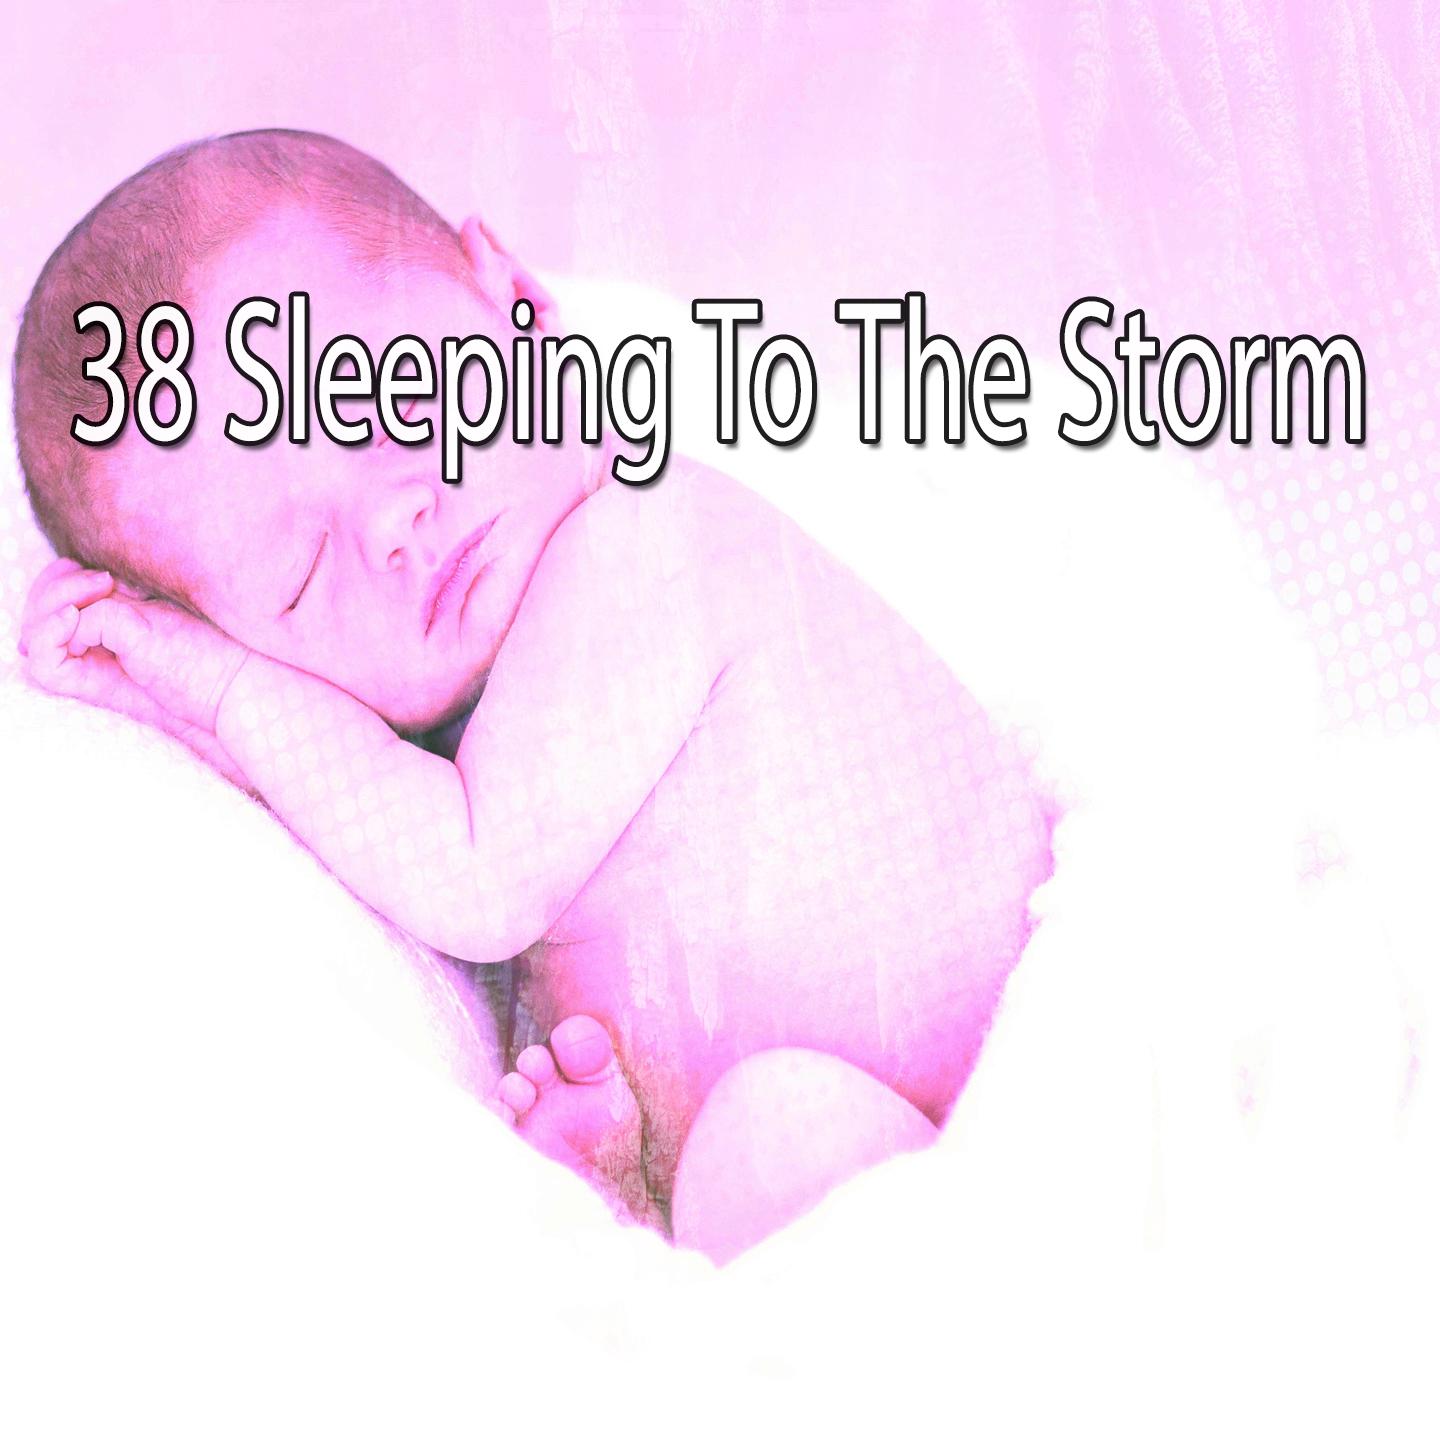 38 Sleeping to the Storm